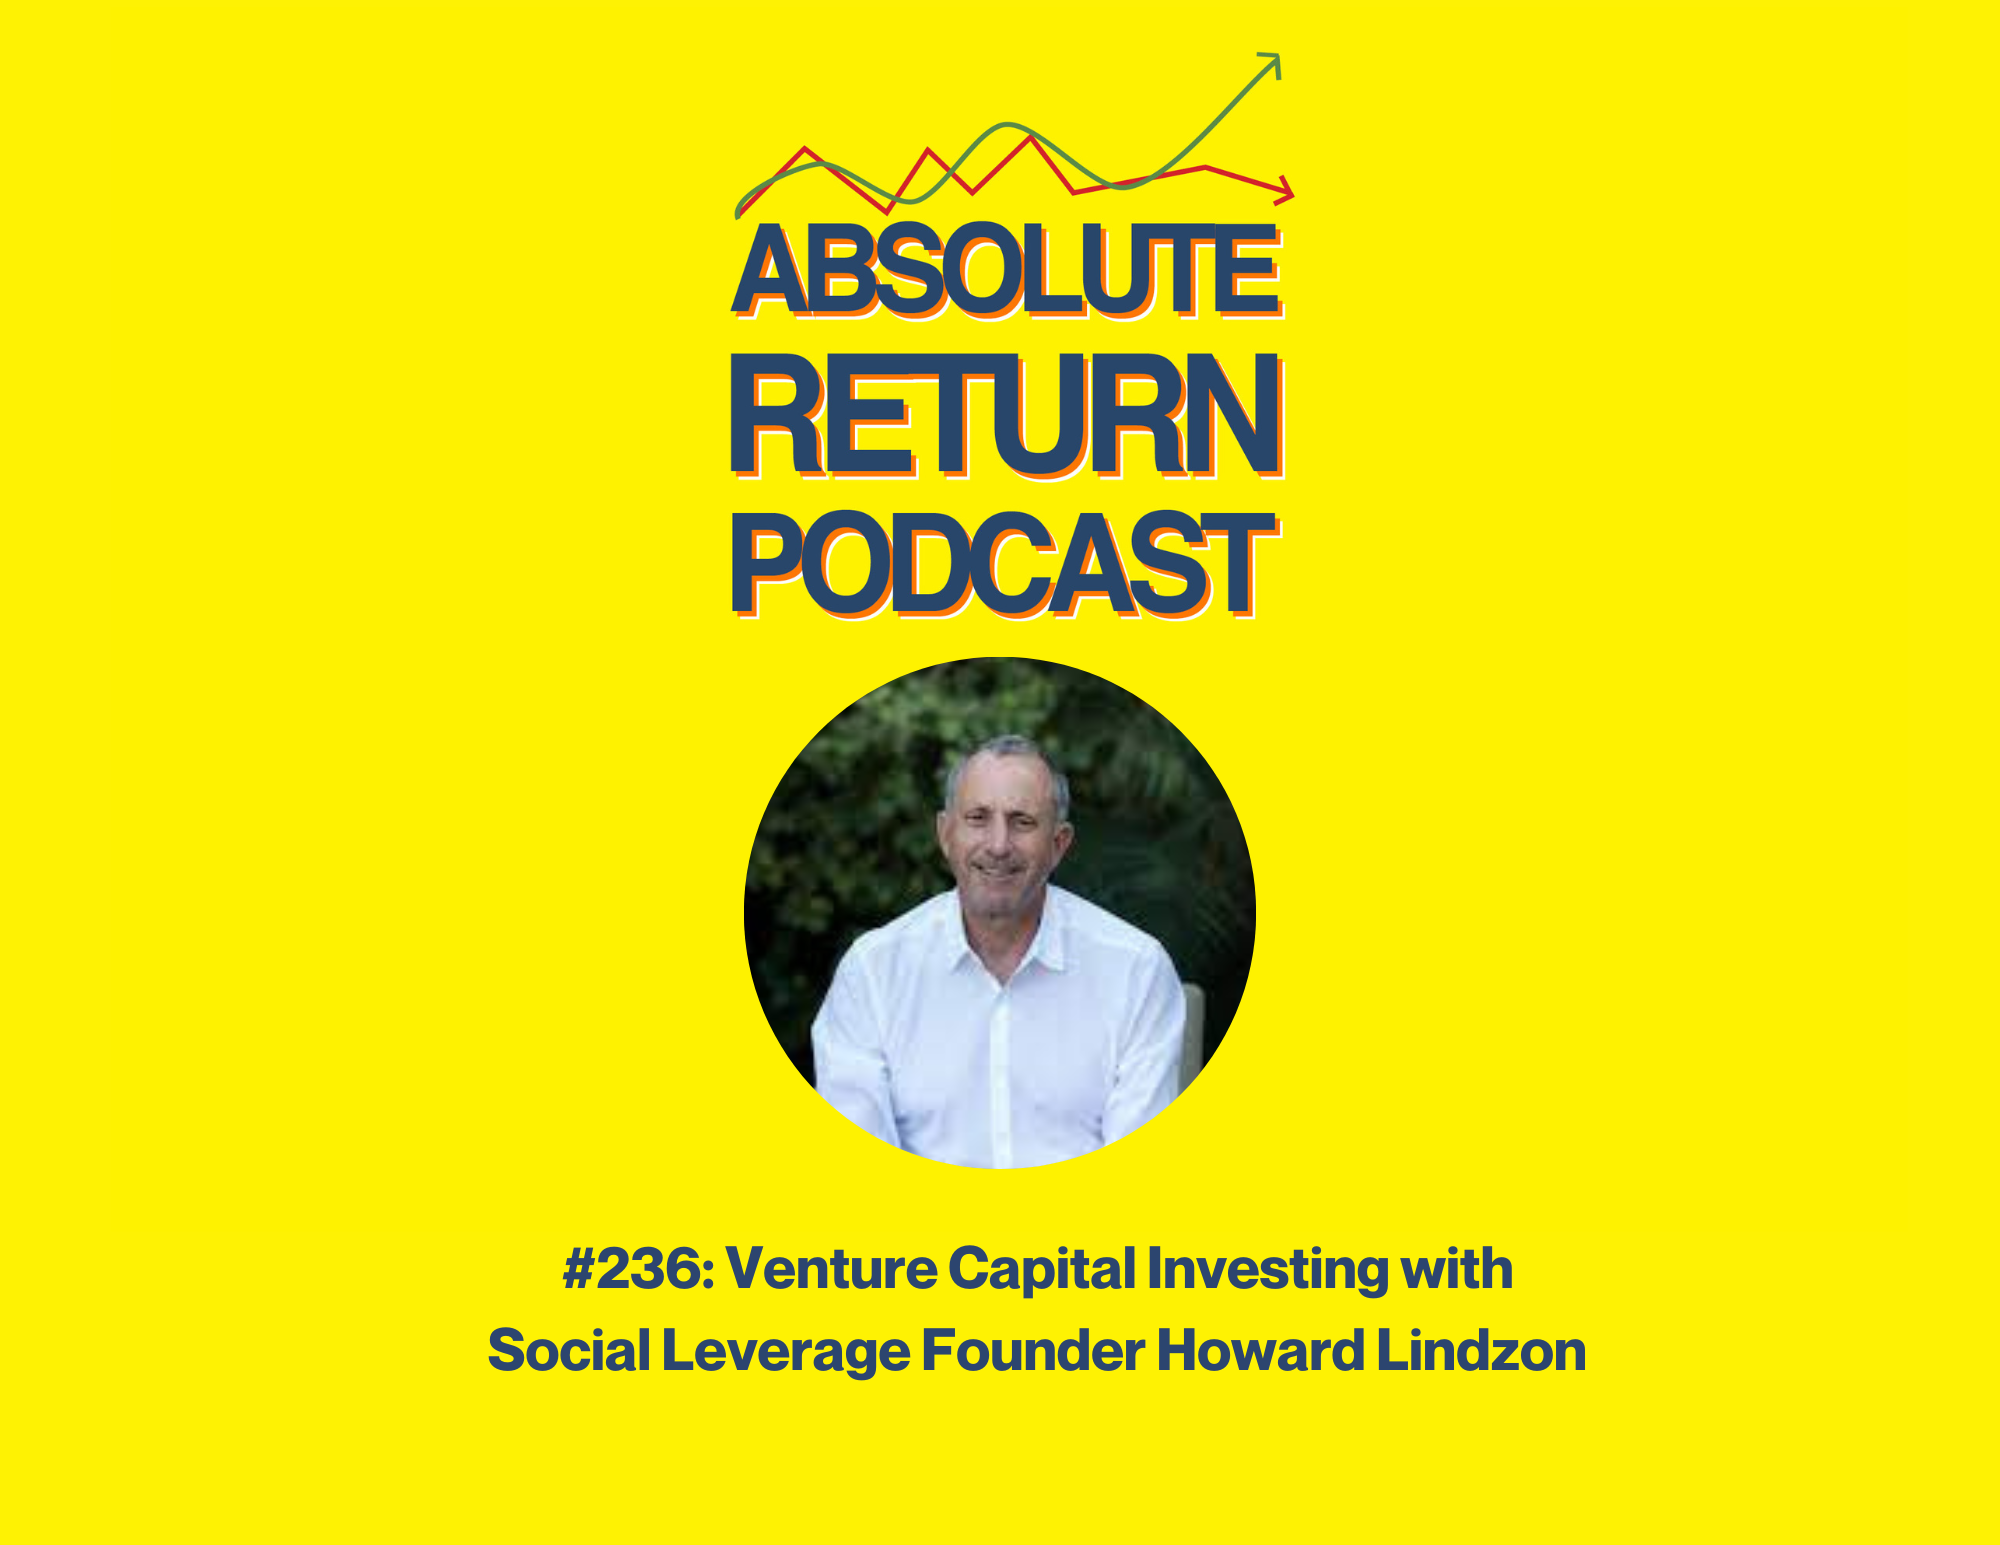 Absolute Return Podcast #236: Venture Capital Investing with Social Leverage Founder Howard Lindzon